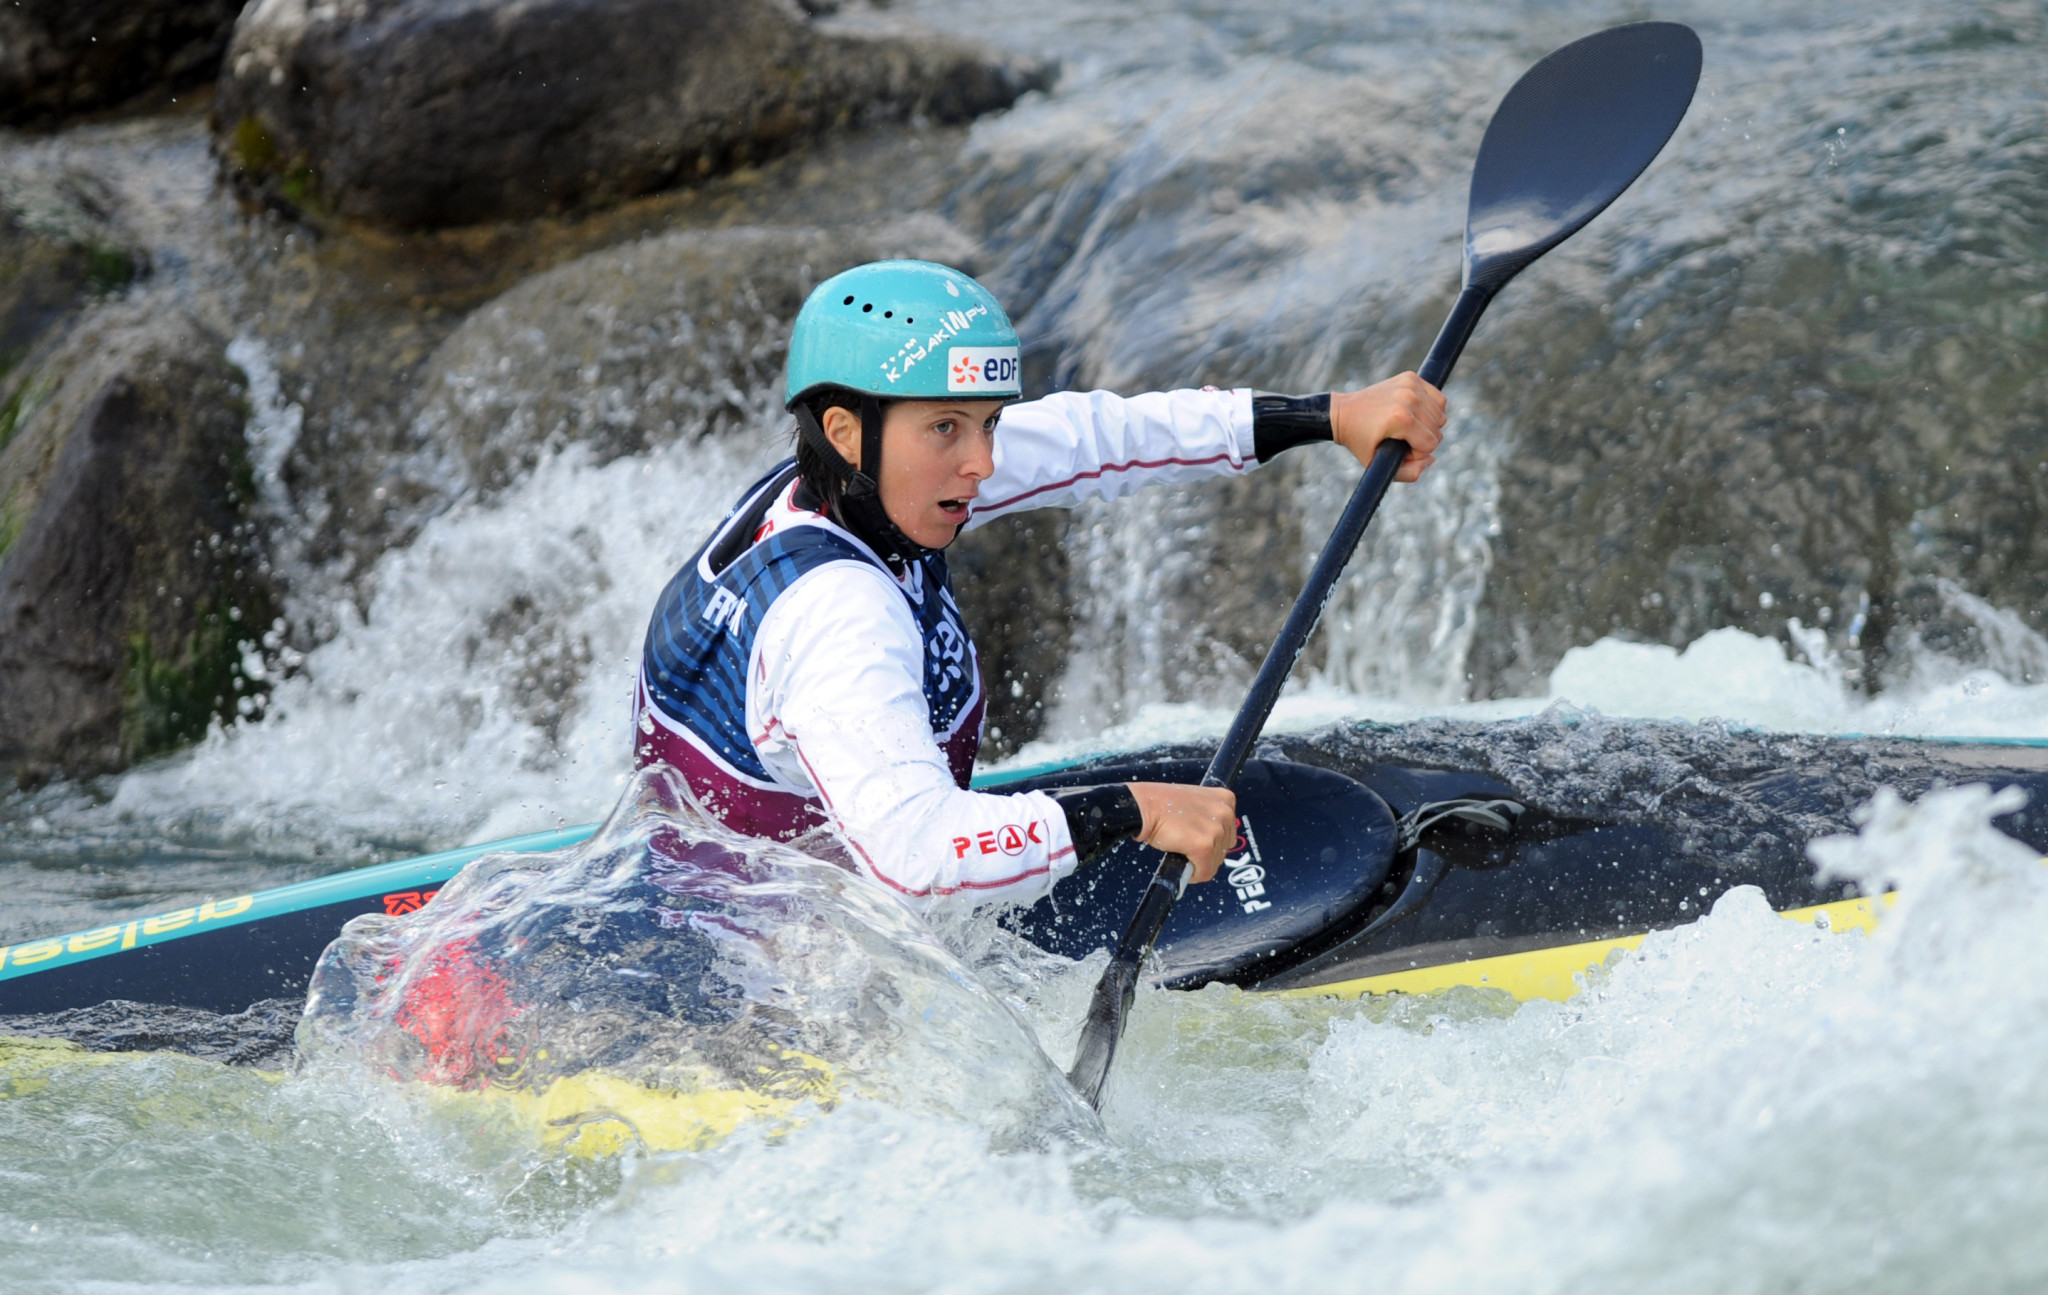 Marie-Zélia Lafont of France won the women's K1 event at the ICF Canoe Slalom World Cup in Pau ©Getty Images